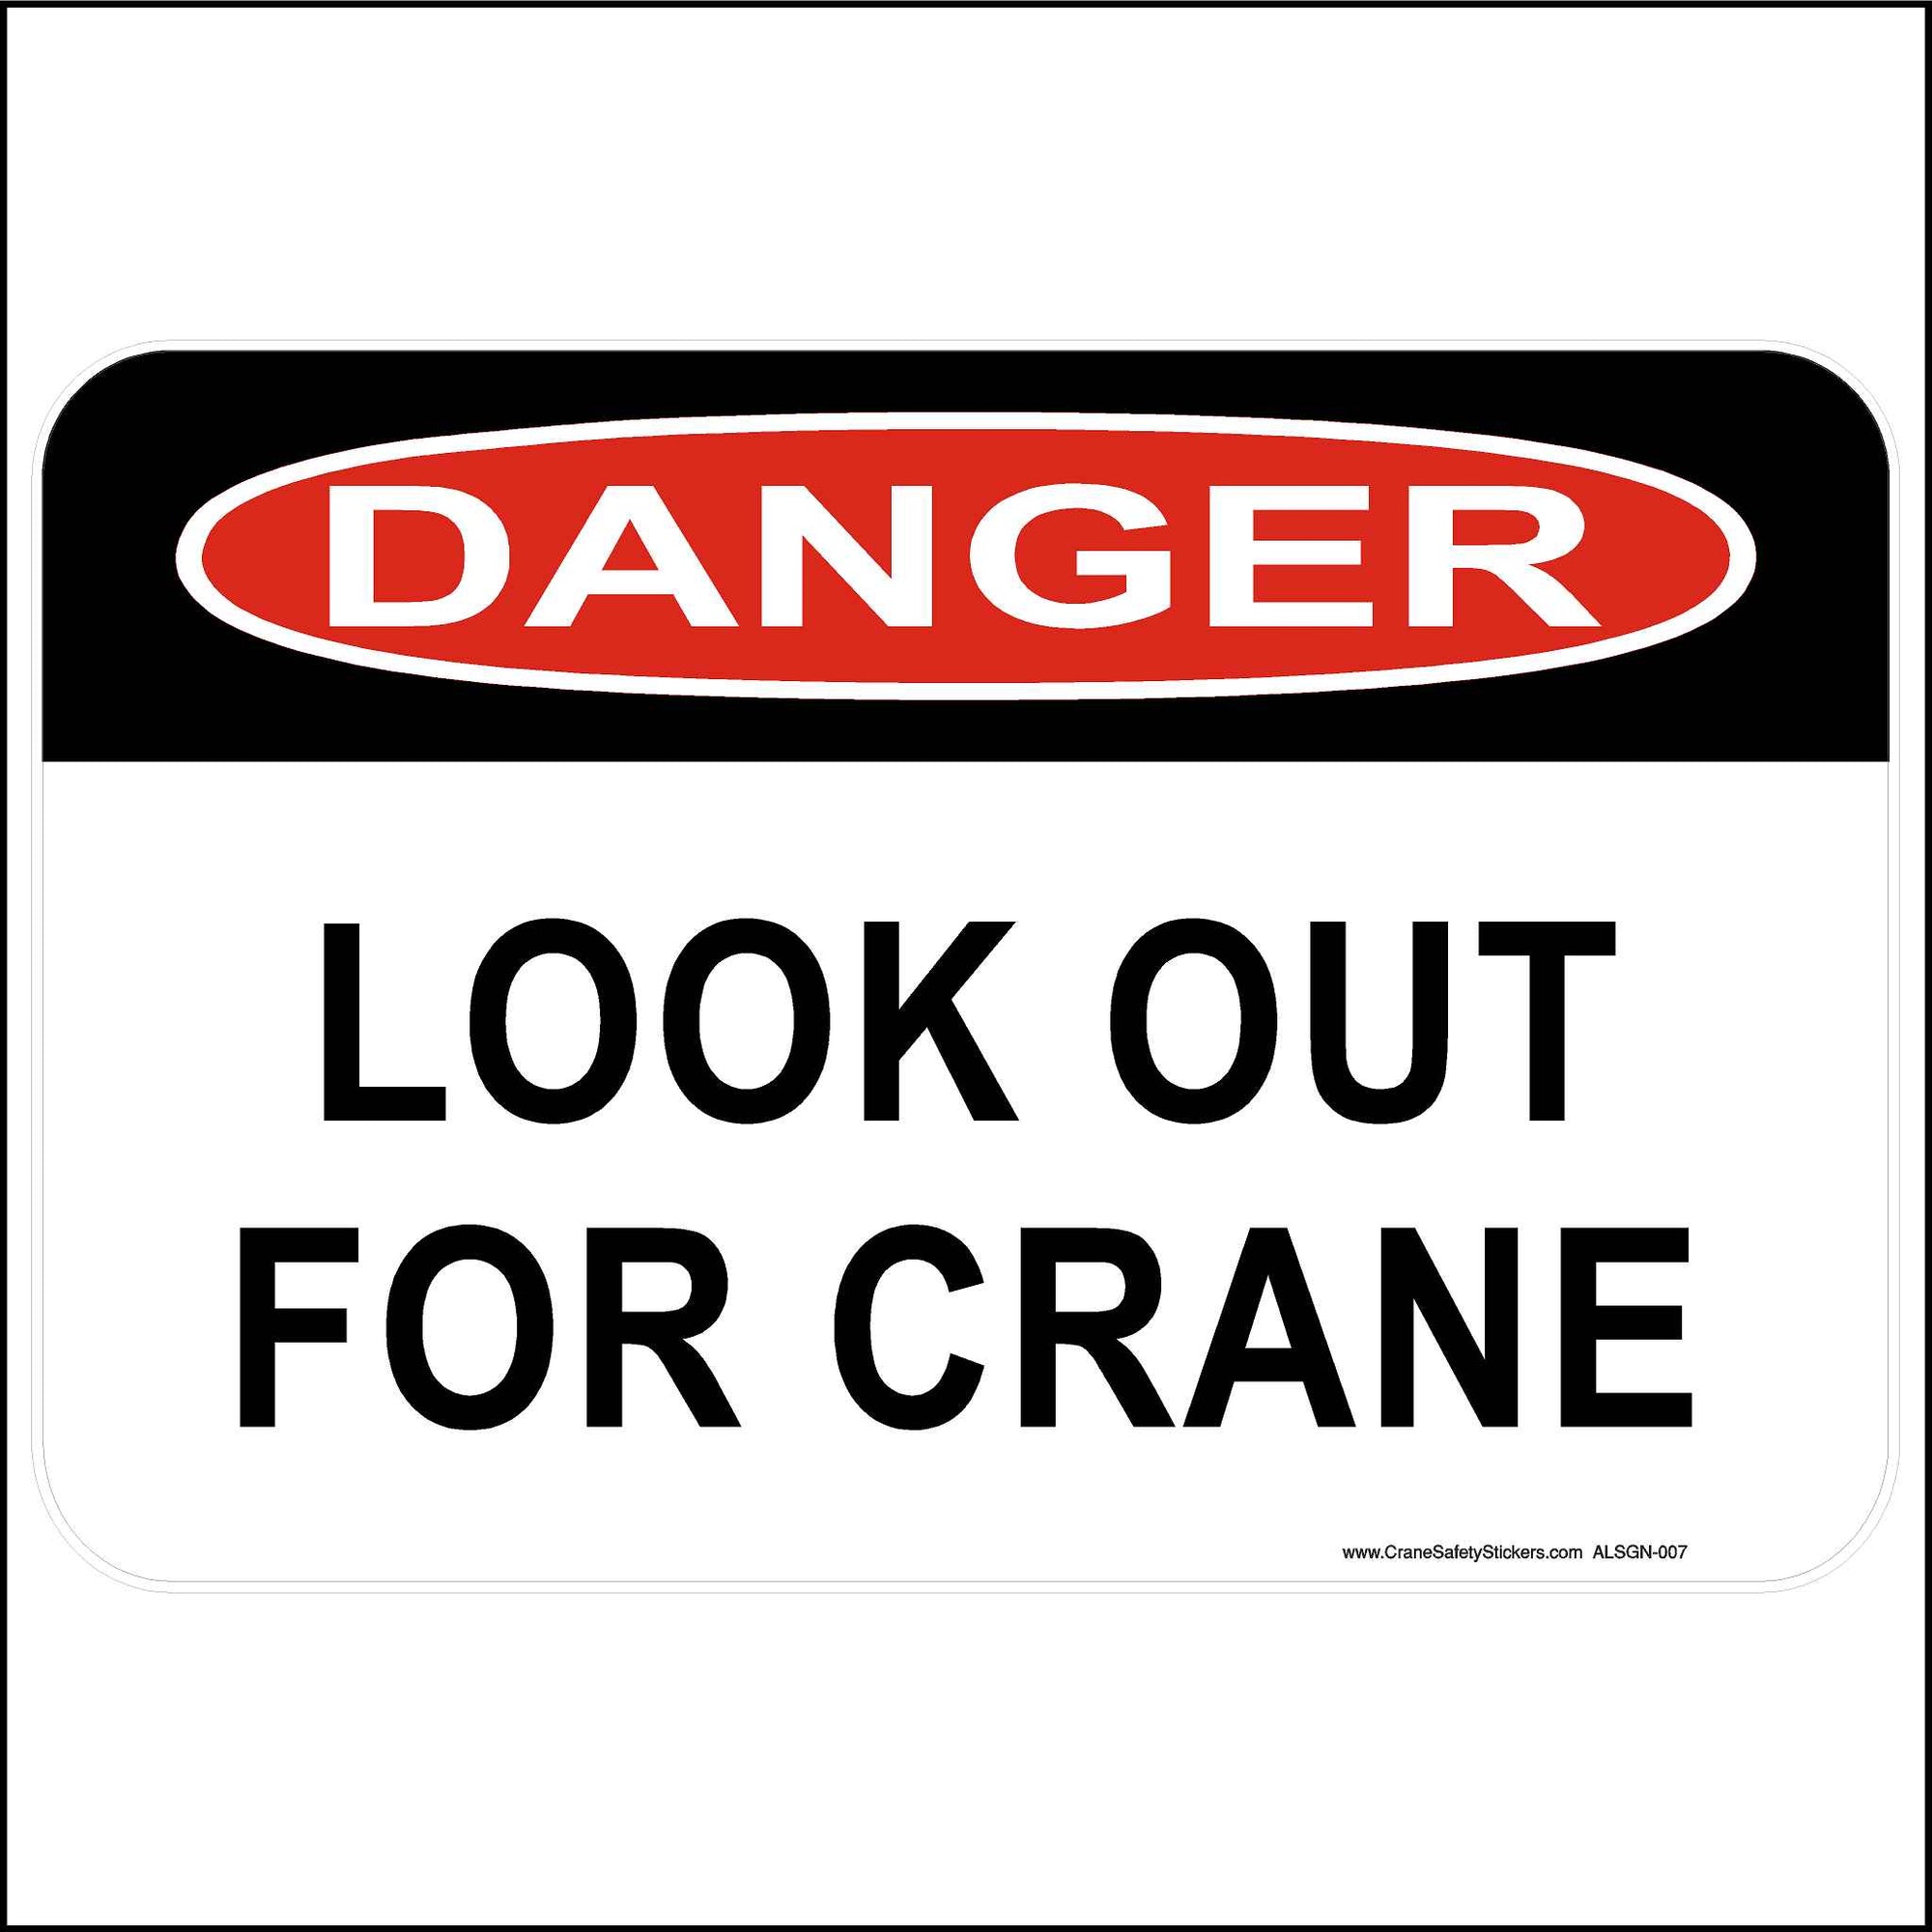 Safety sign that reads Danger Look Out For Crane.